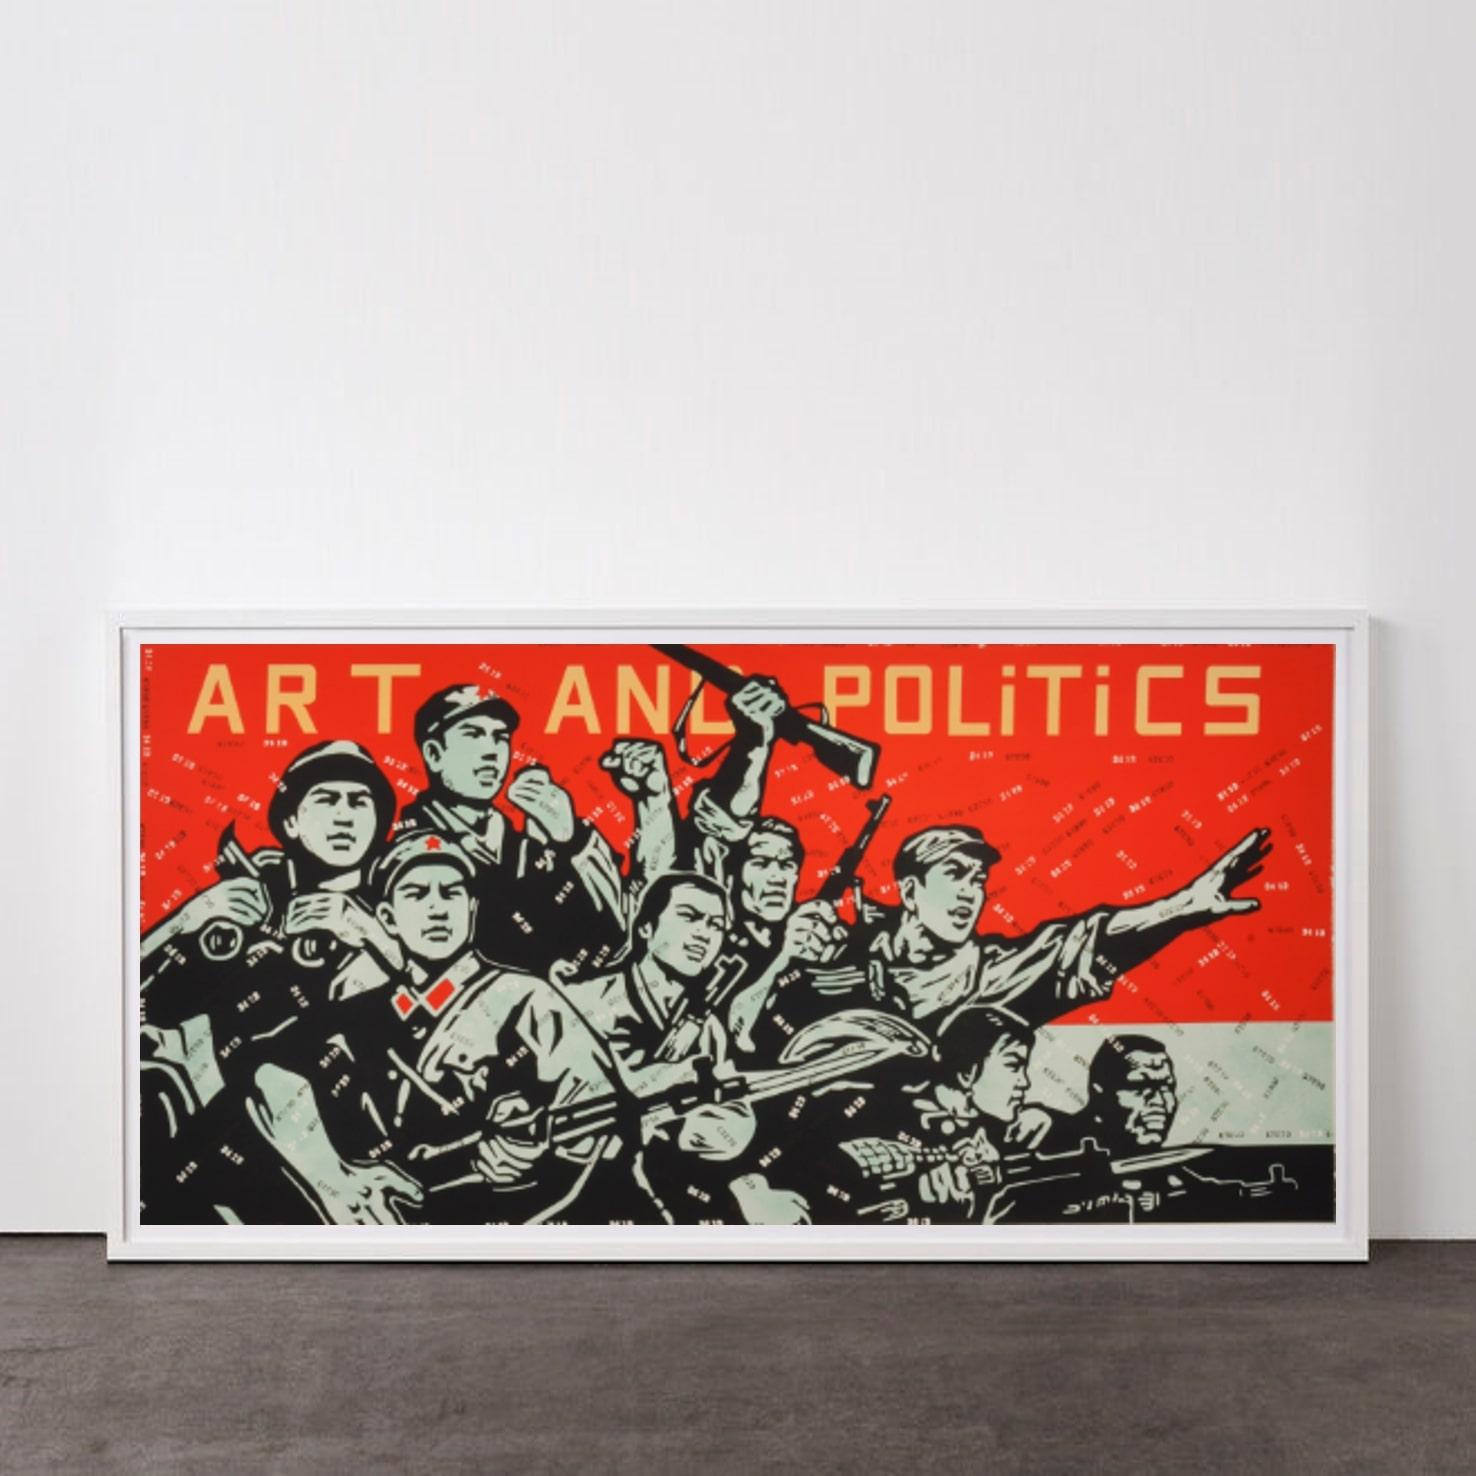 Art and Politics - Contemporary, 21st Century, Lithograph, Limited Edition - Print by Wang Guangyi